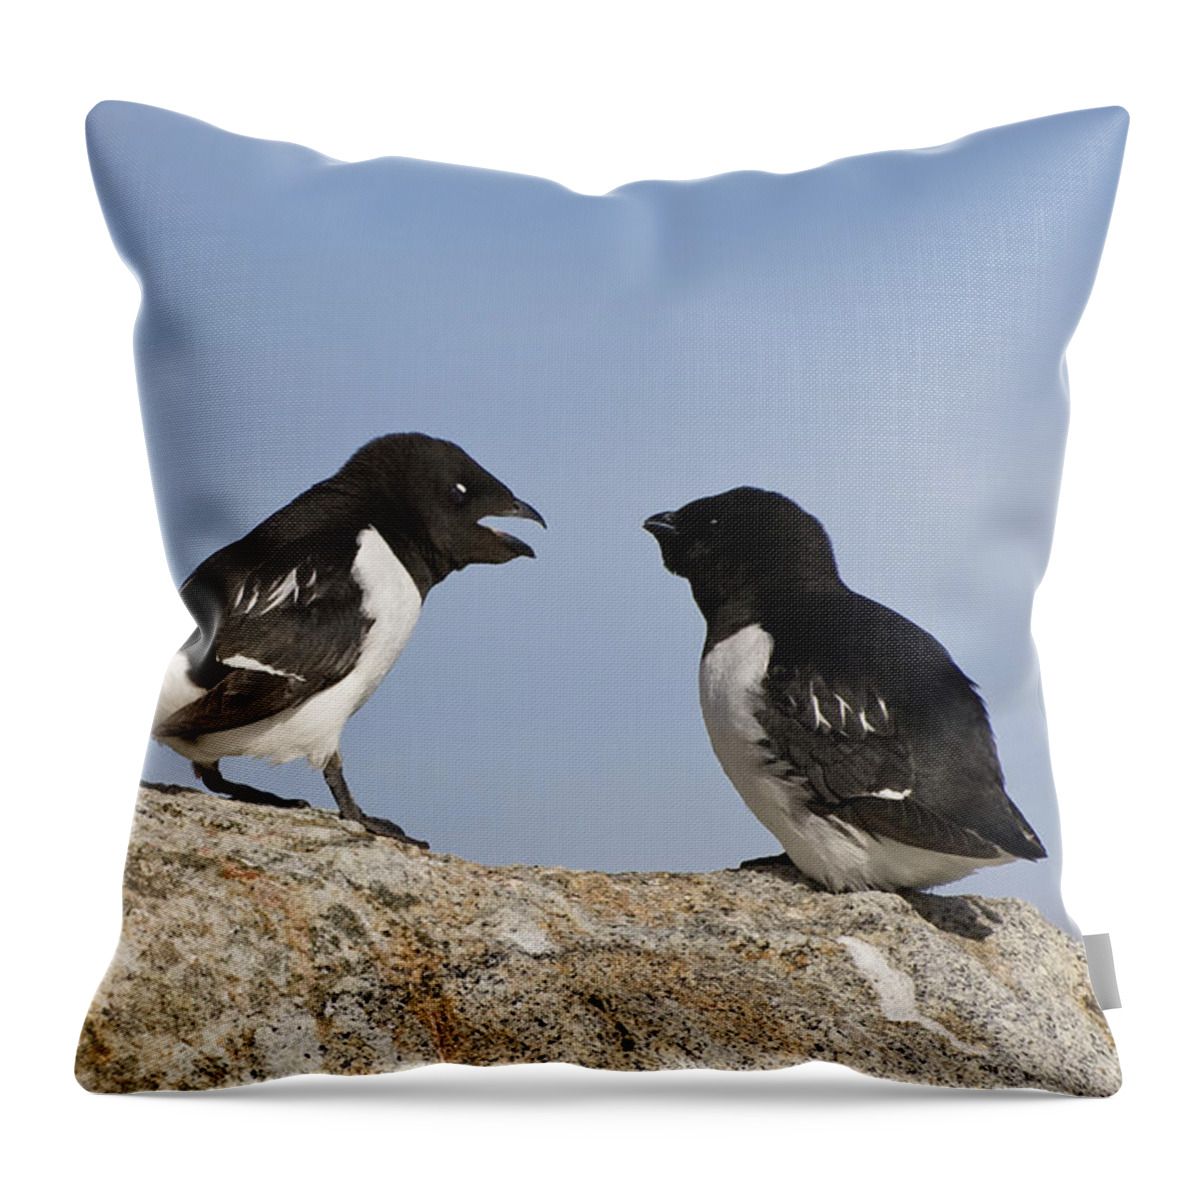 Feb0514 Throw Pillow featuring the photograph Little Auk Pair Spitsbergen Norway by Konrad Wothe